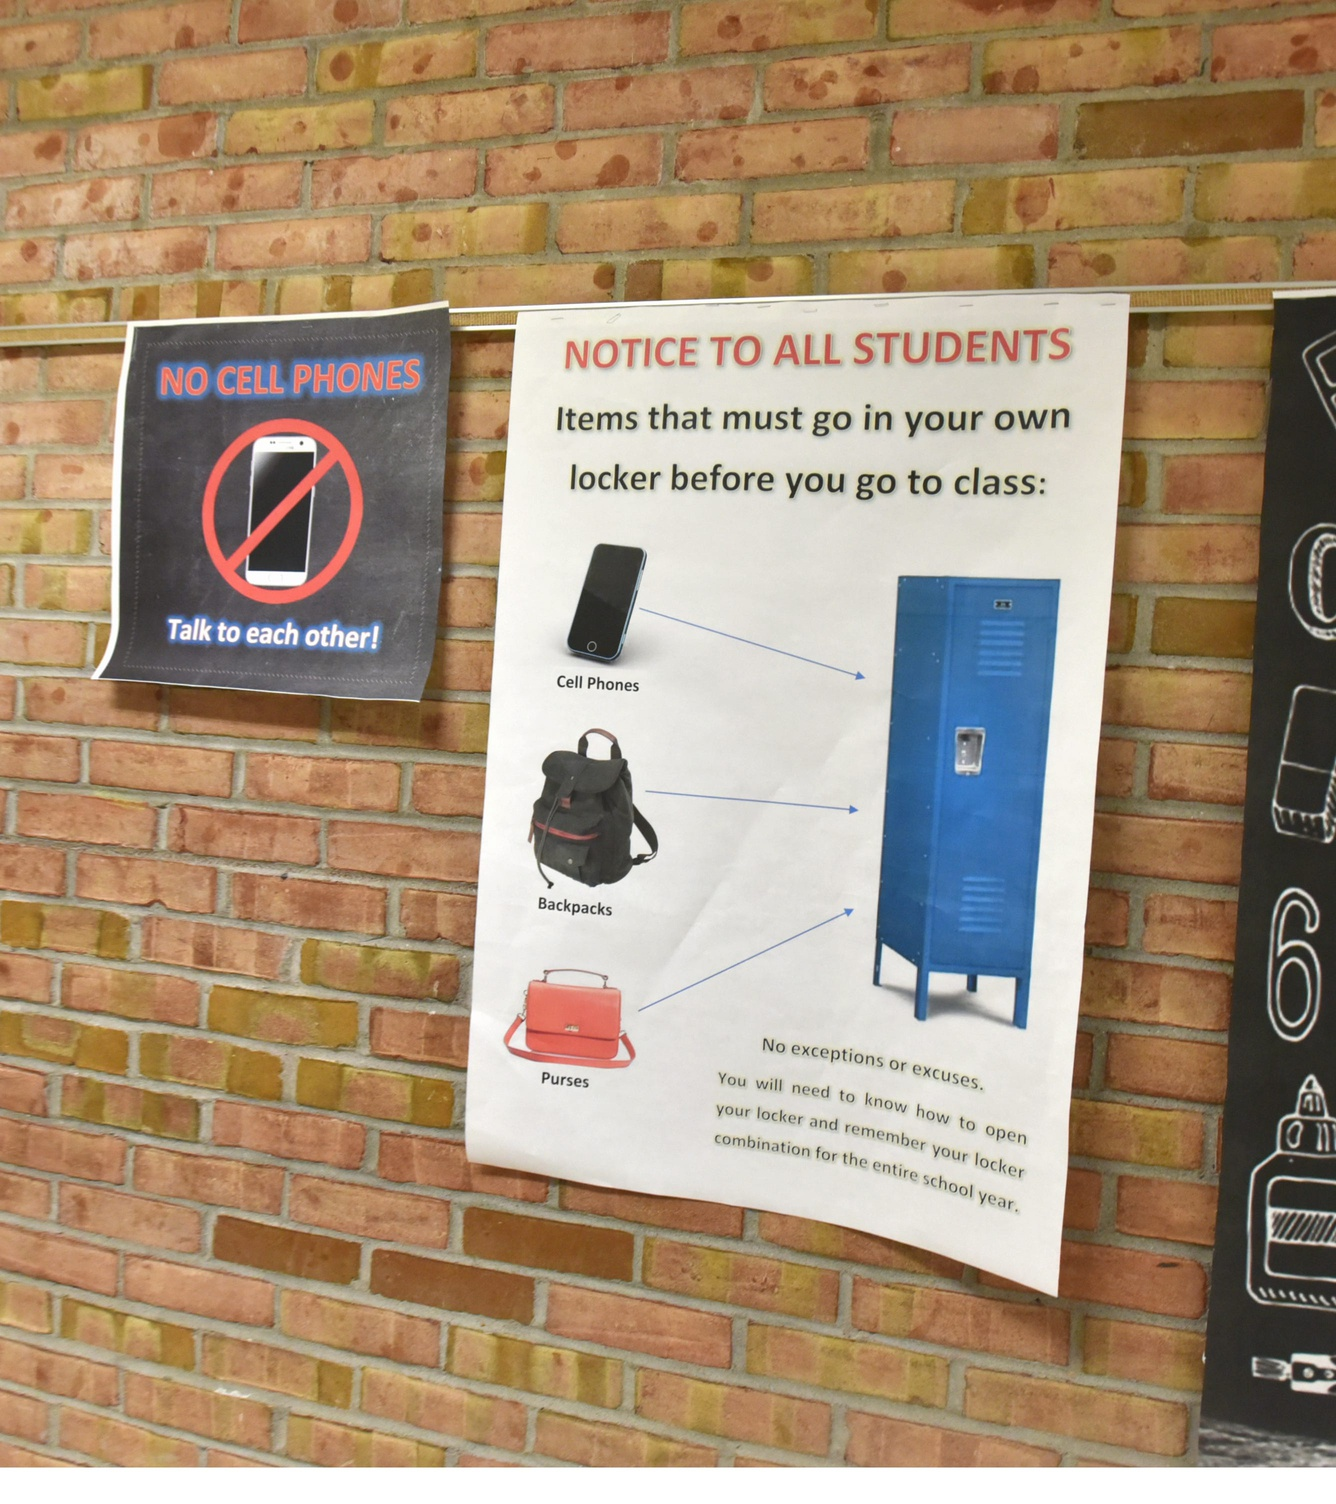 Getting cellphones out of the classroom